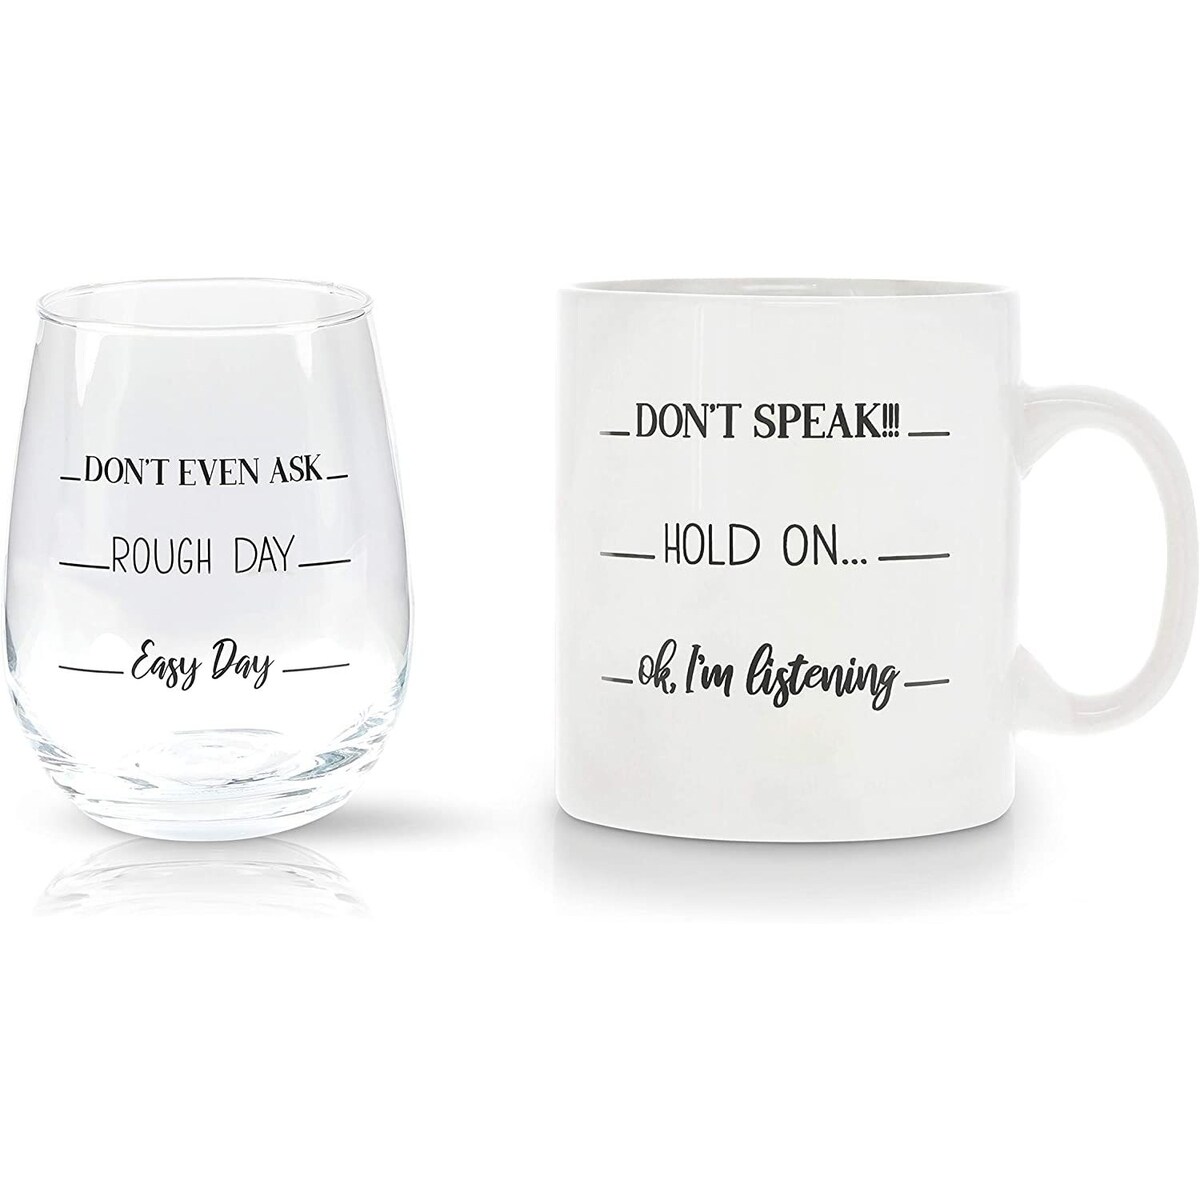 Coffee cup and wine glass set